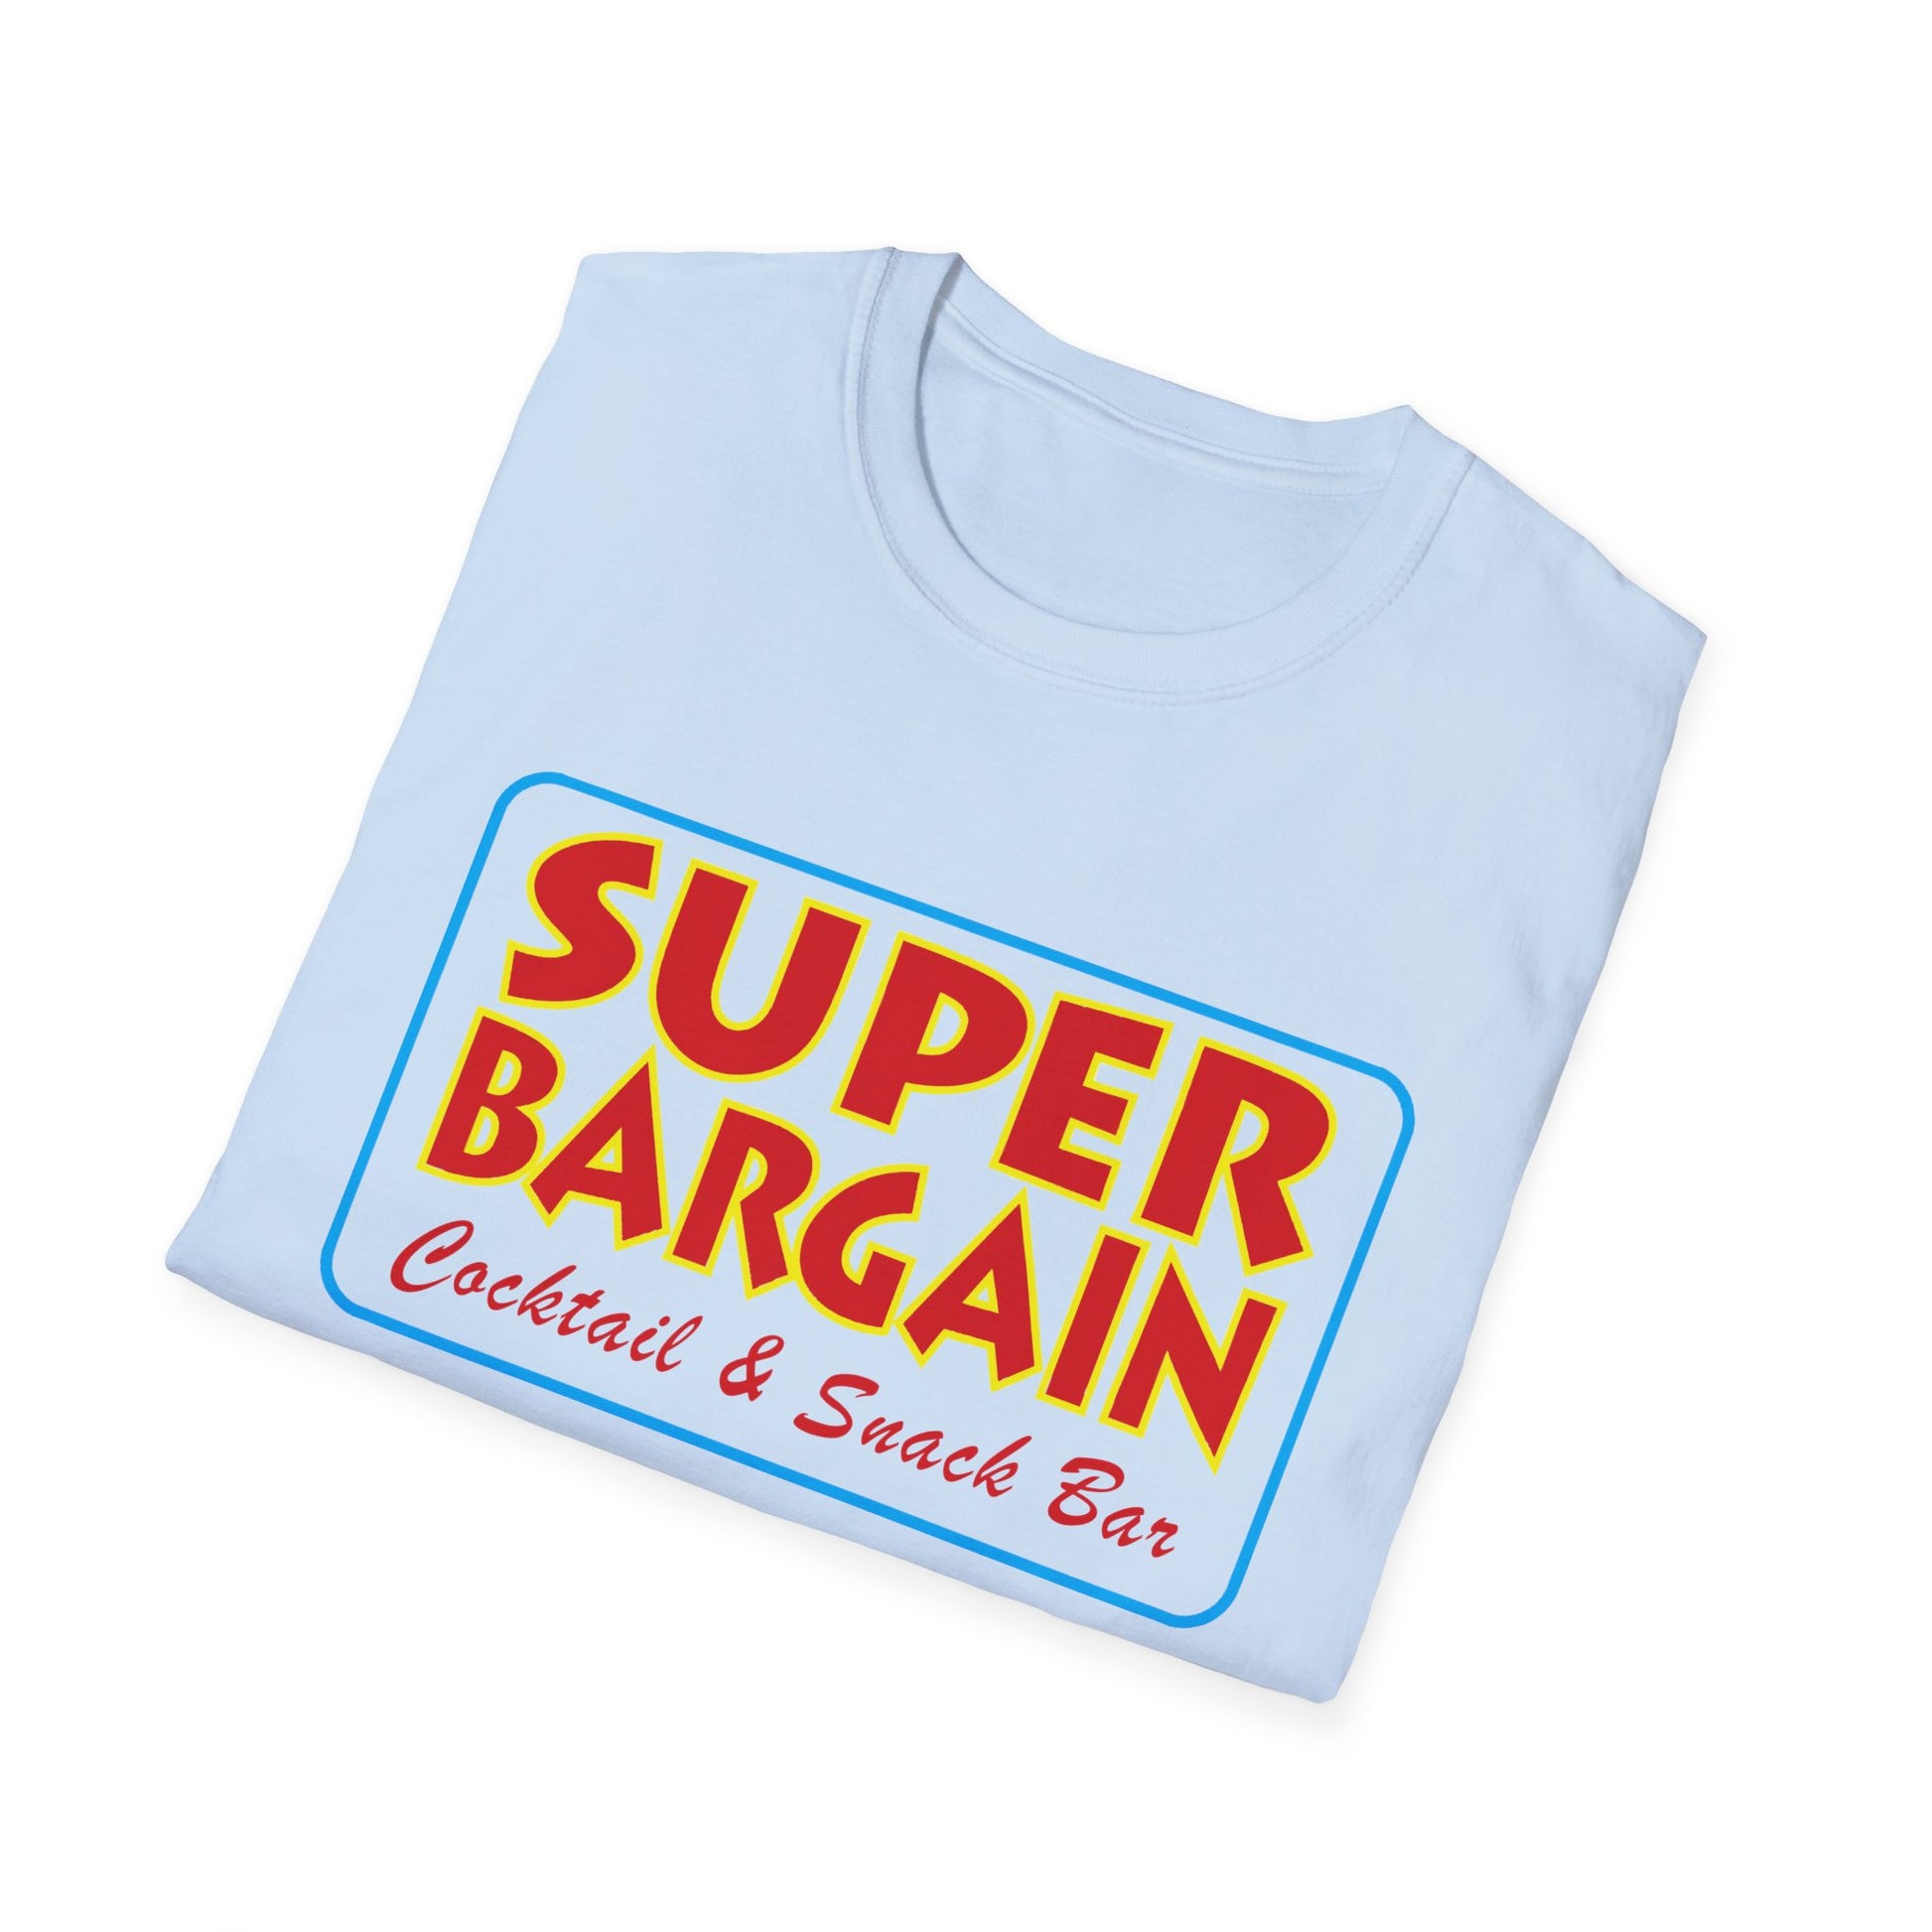 Light blue folded Unisex Softstyle Logo T-Shirt with a bright red and yellow logo that reads "Cabbagetown SUPER BARGAIN Cocktail & Snack Bar" on a white background by Printify.